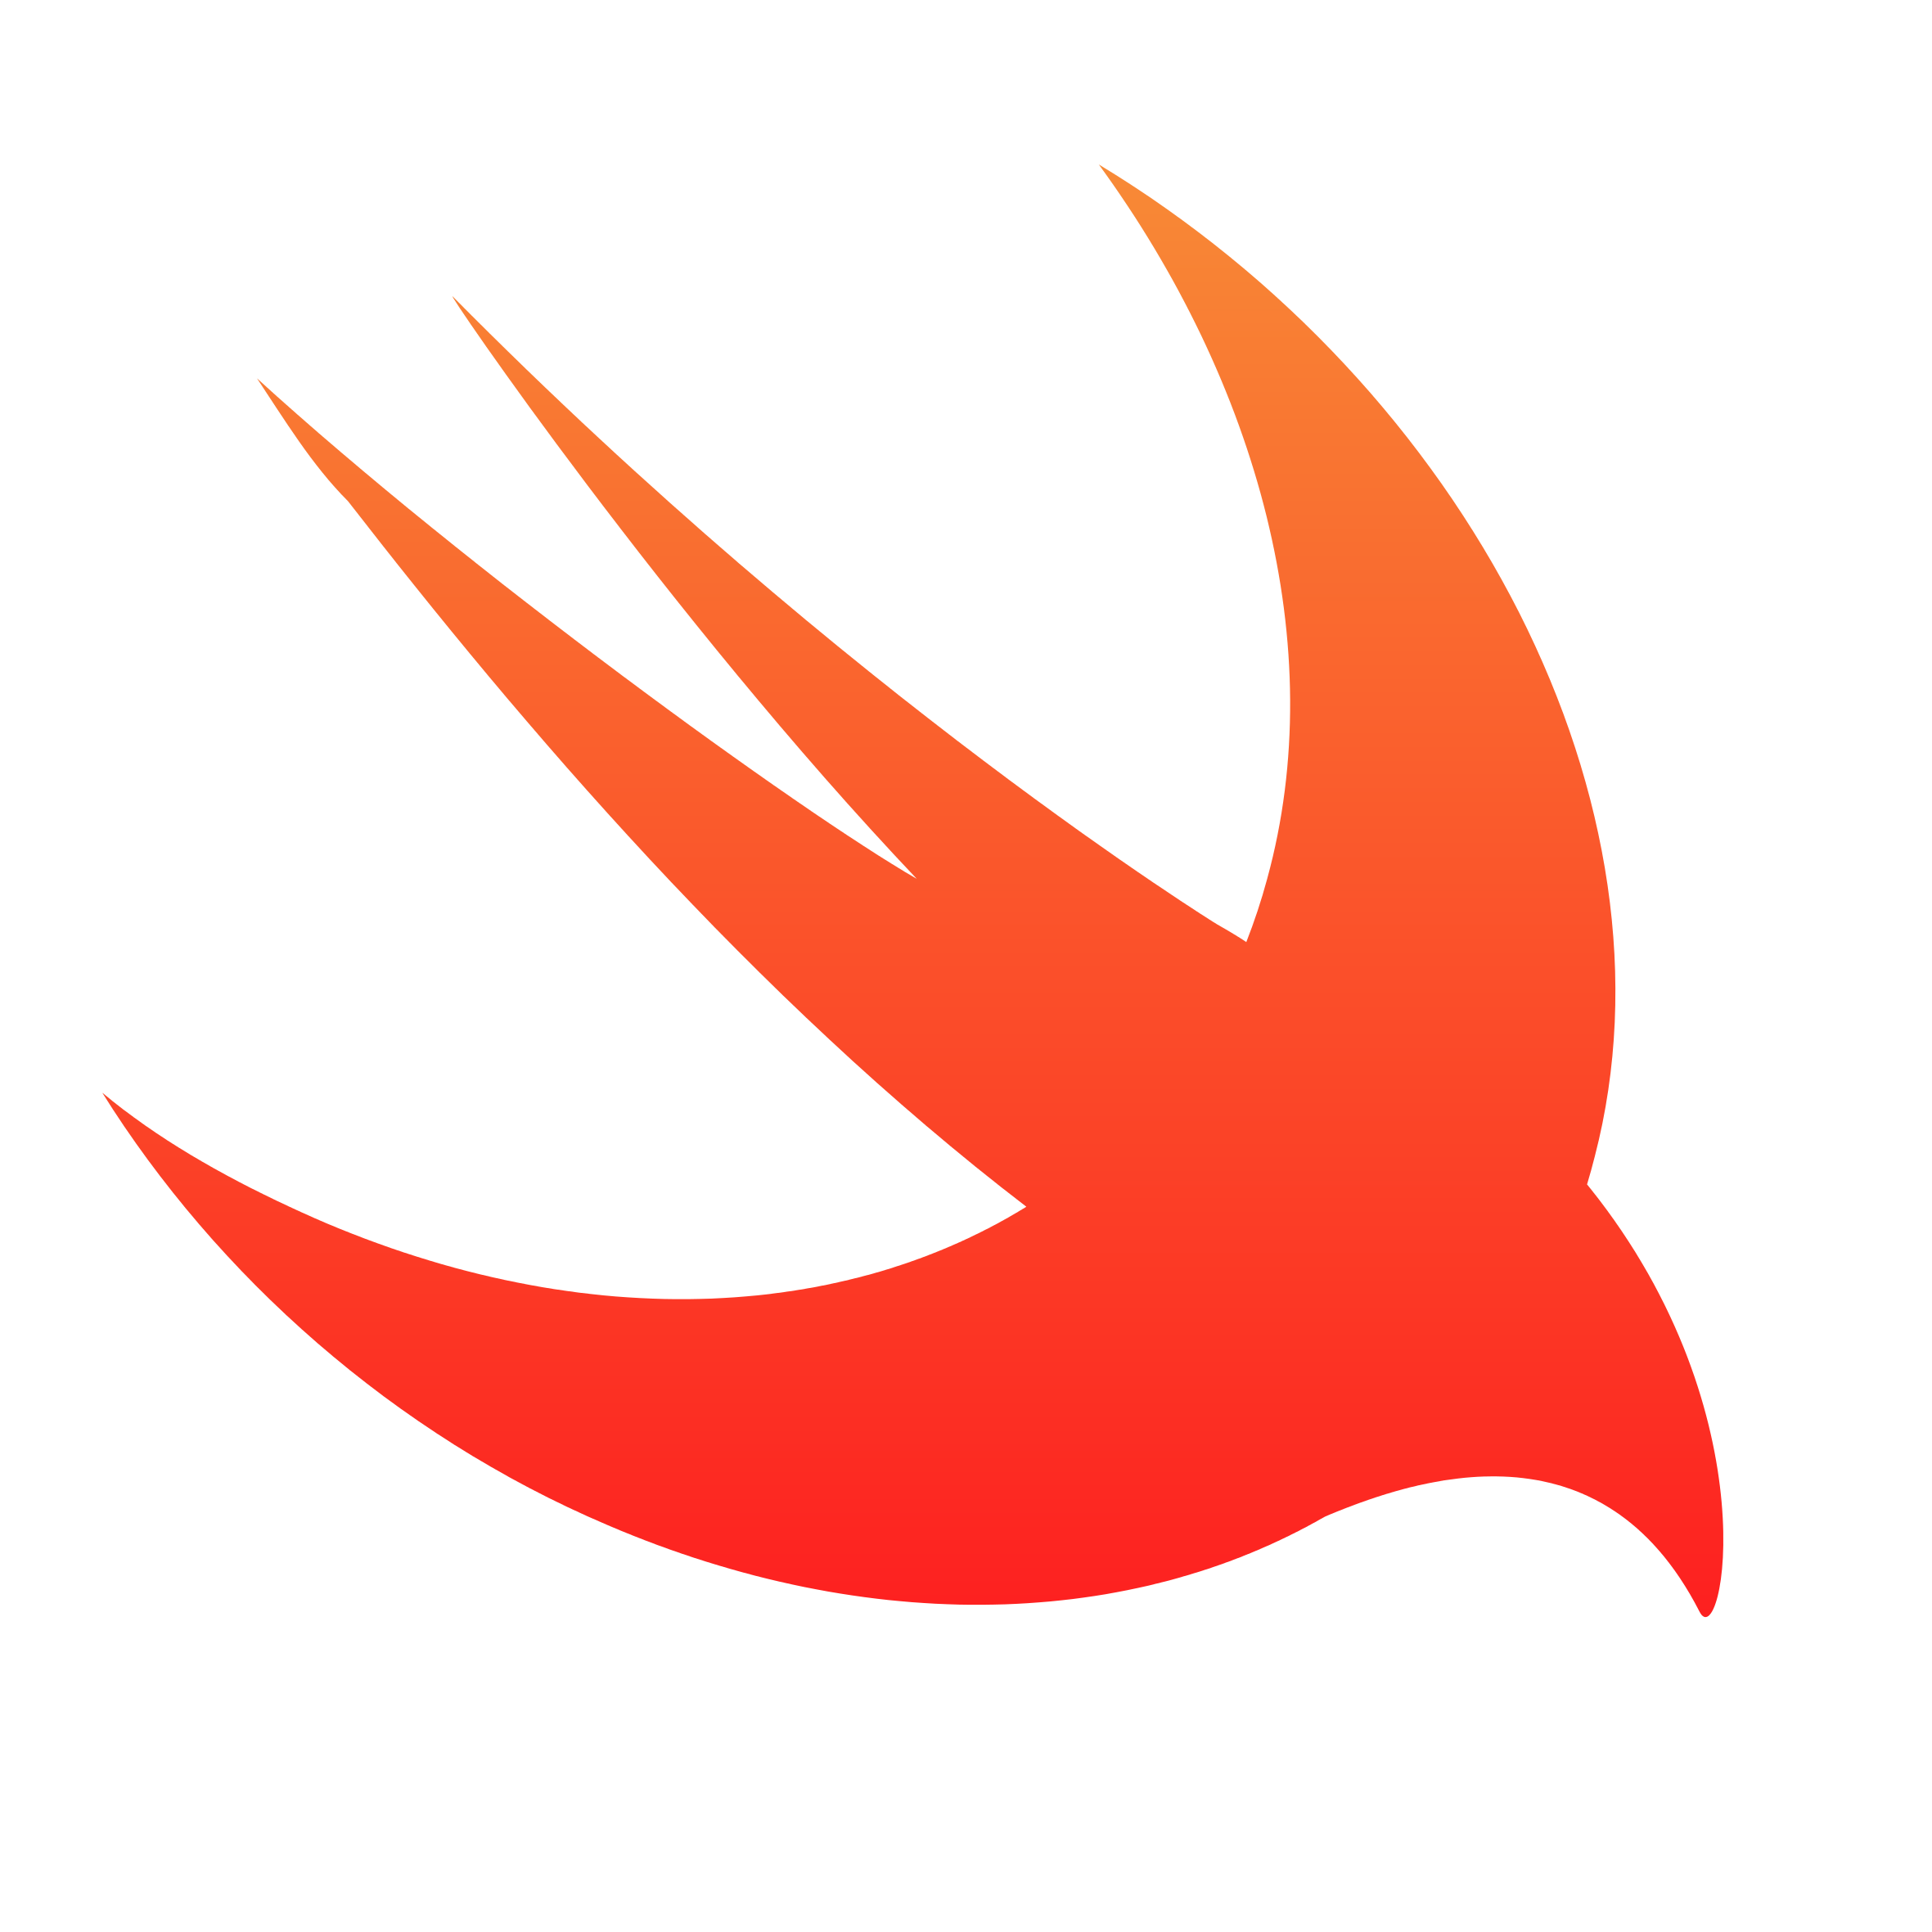 code examples and answer to questions in SWIFT programming luaguage